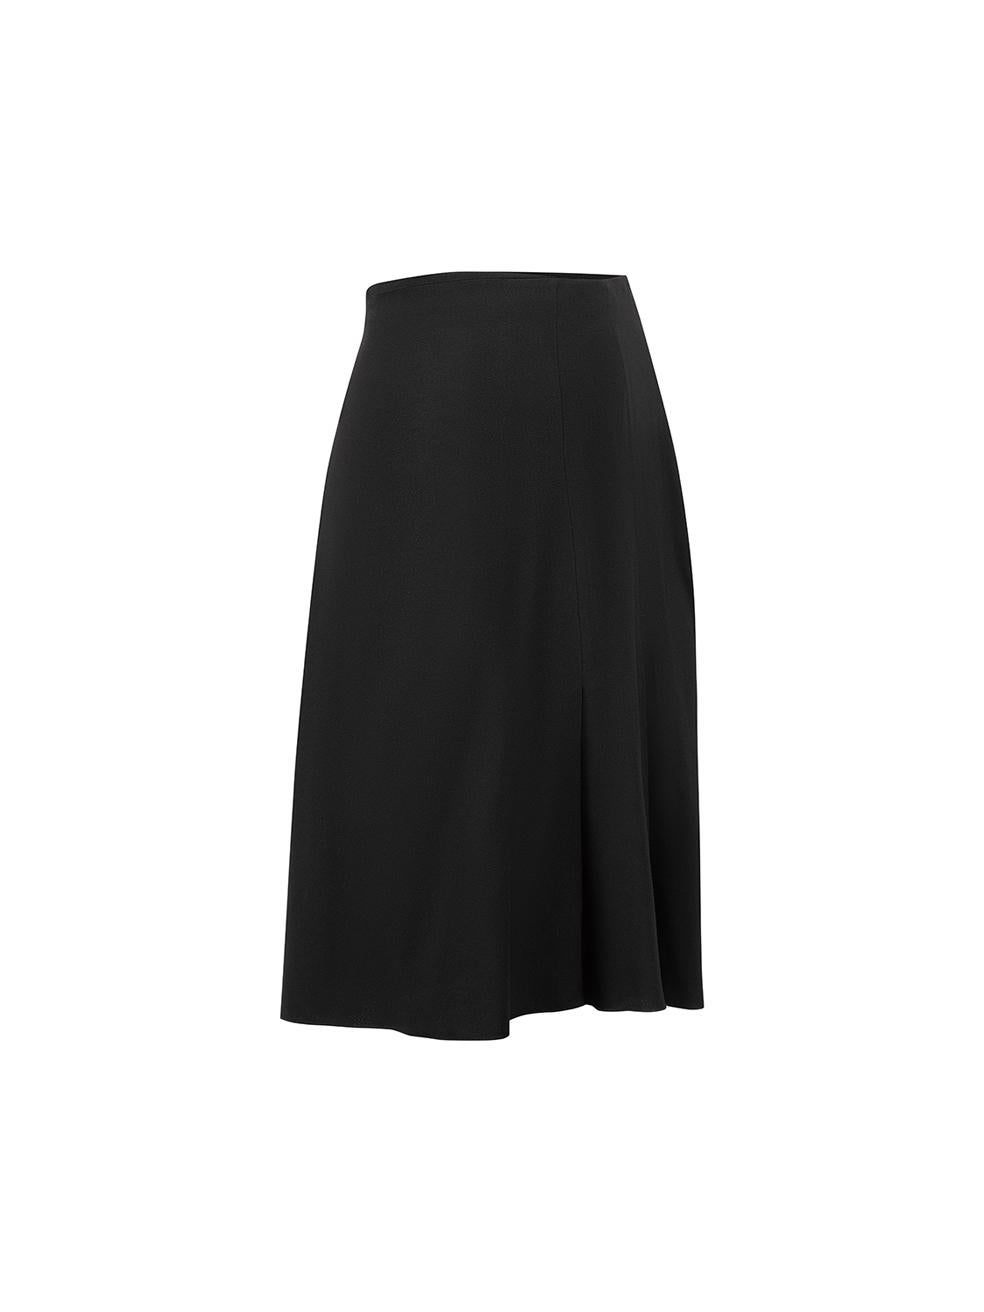 CONDITION is Very good. Hardly any visible wear to skirt is evident on this used Prada designer resale item.



Details


Black

Polyester

Mini skirt

A-line

Pleated detail

Back zip fastening





Made in Italy 



Composition

NO COMPOSITION